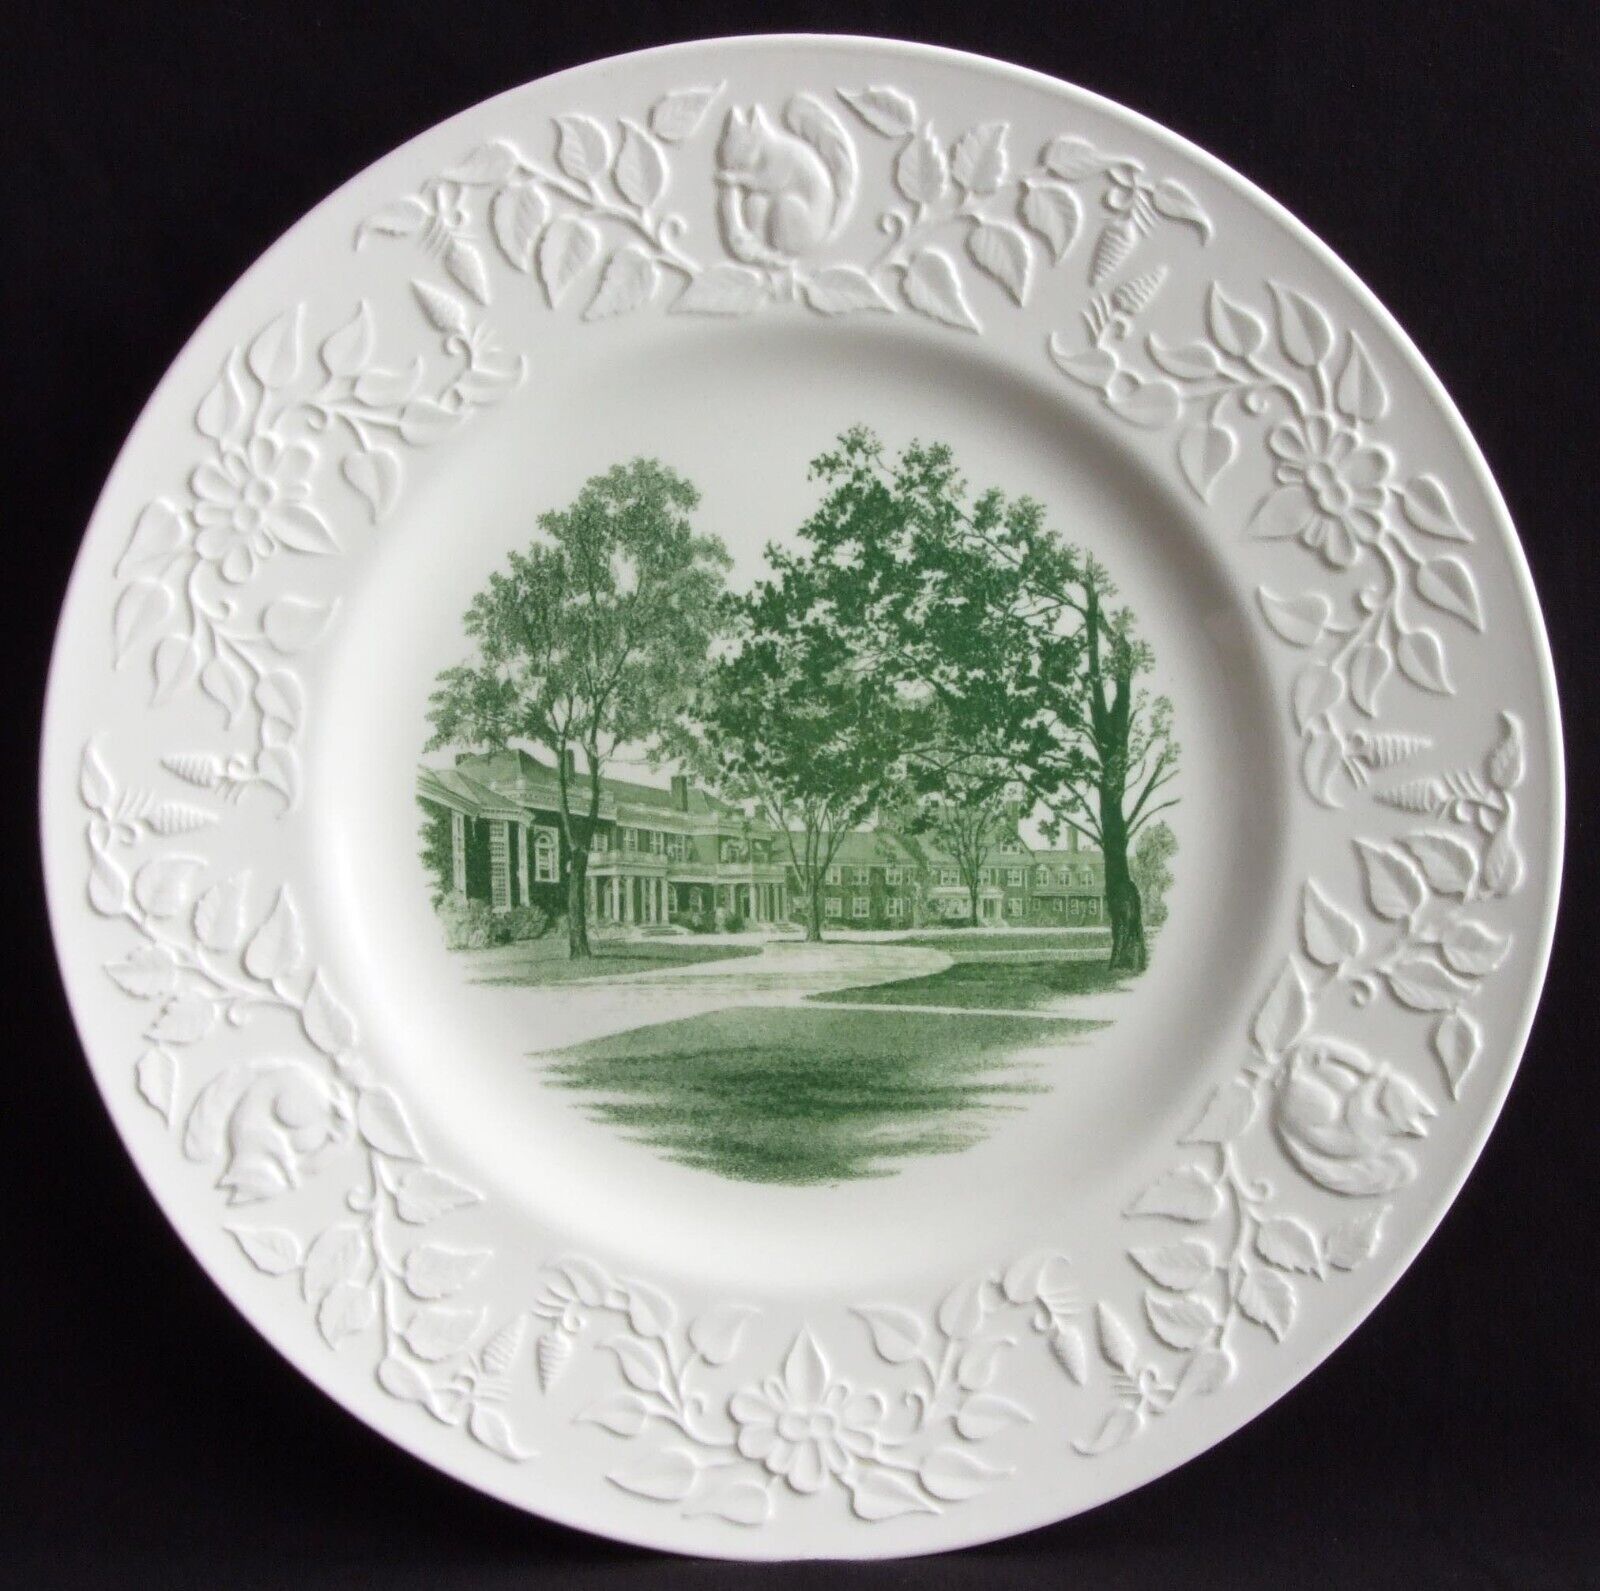 Vintage 1930s Groton School, Hundred House Wedgwood 10.5-inch Plate